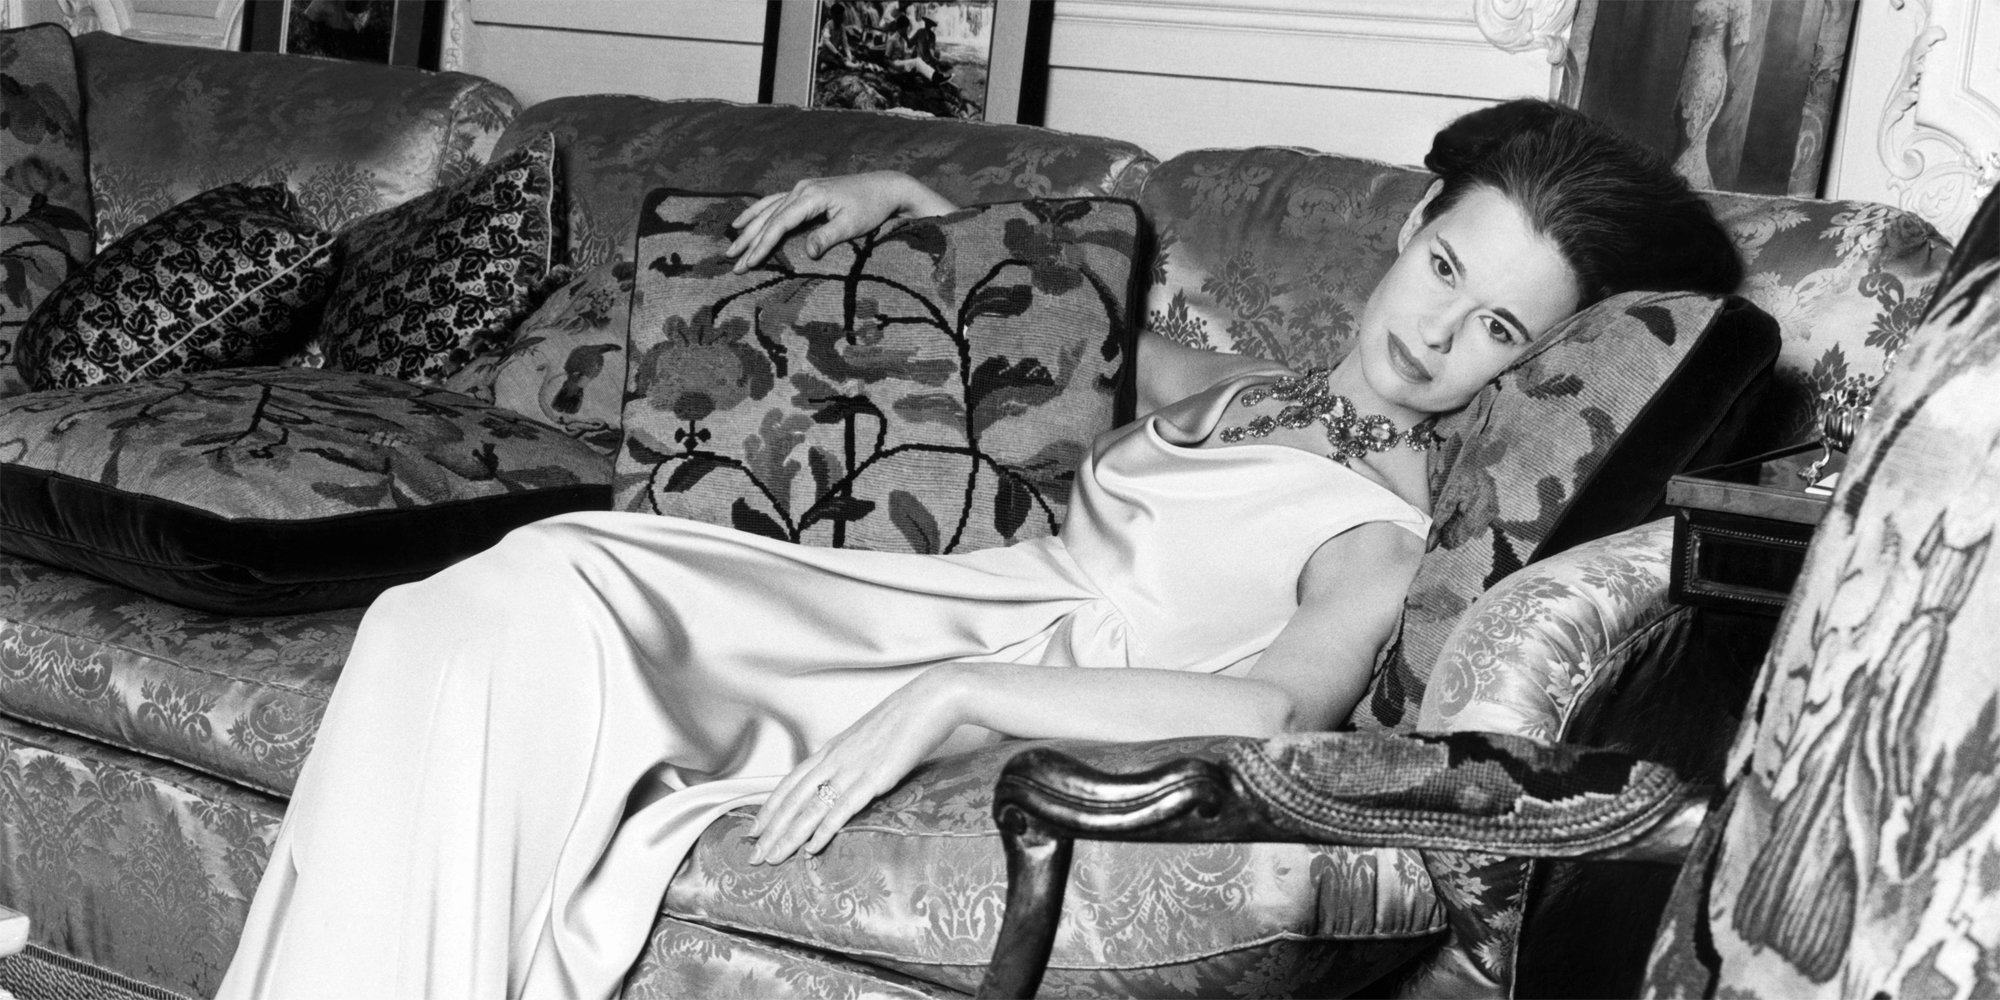 Gloria Vanderbilt, sister of Thelma Furness (ex-lover of King Edward VIII) died of stomach cancer